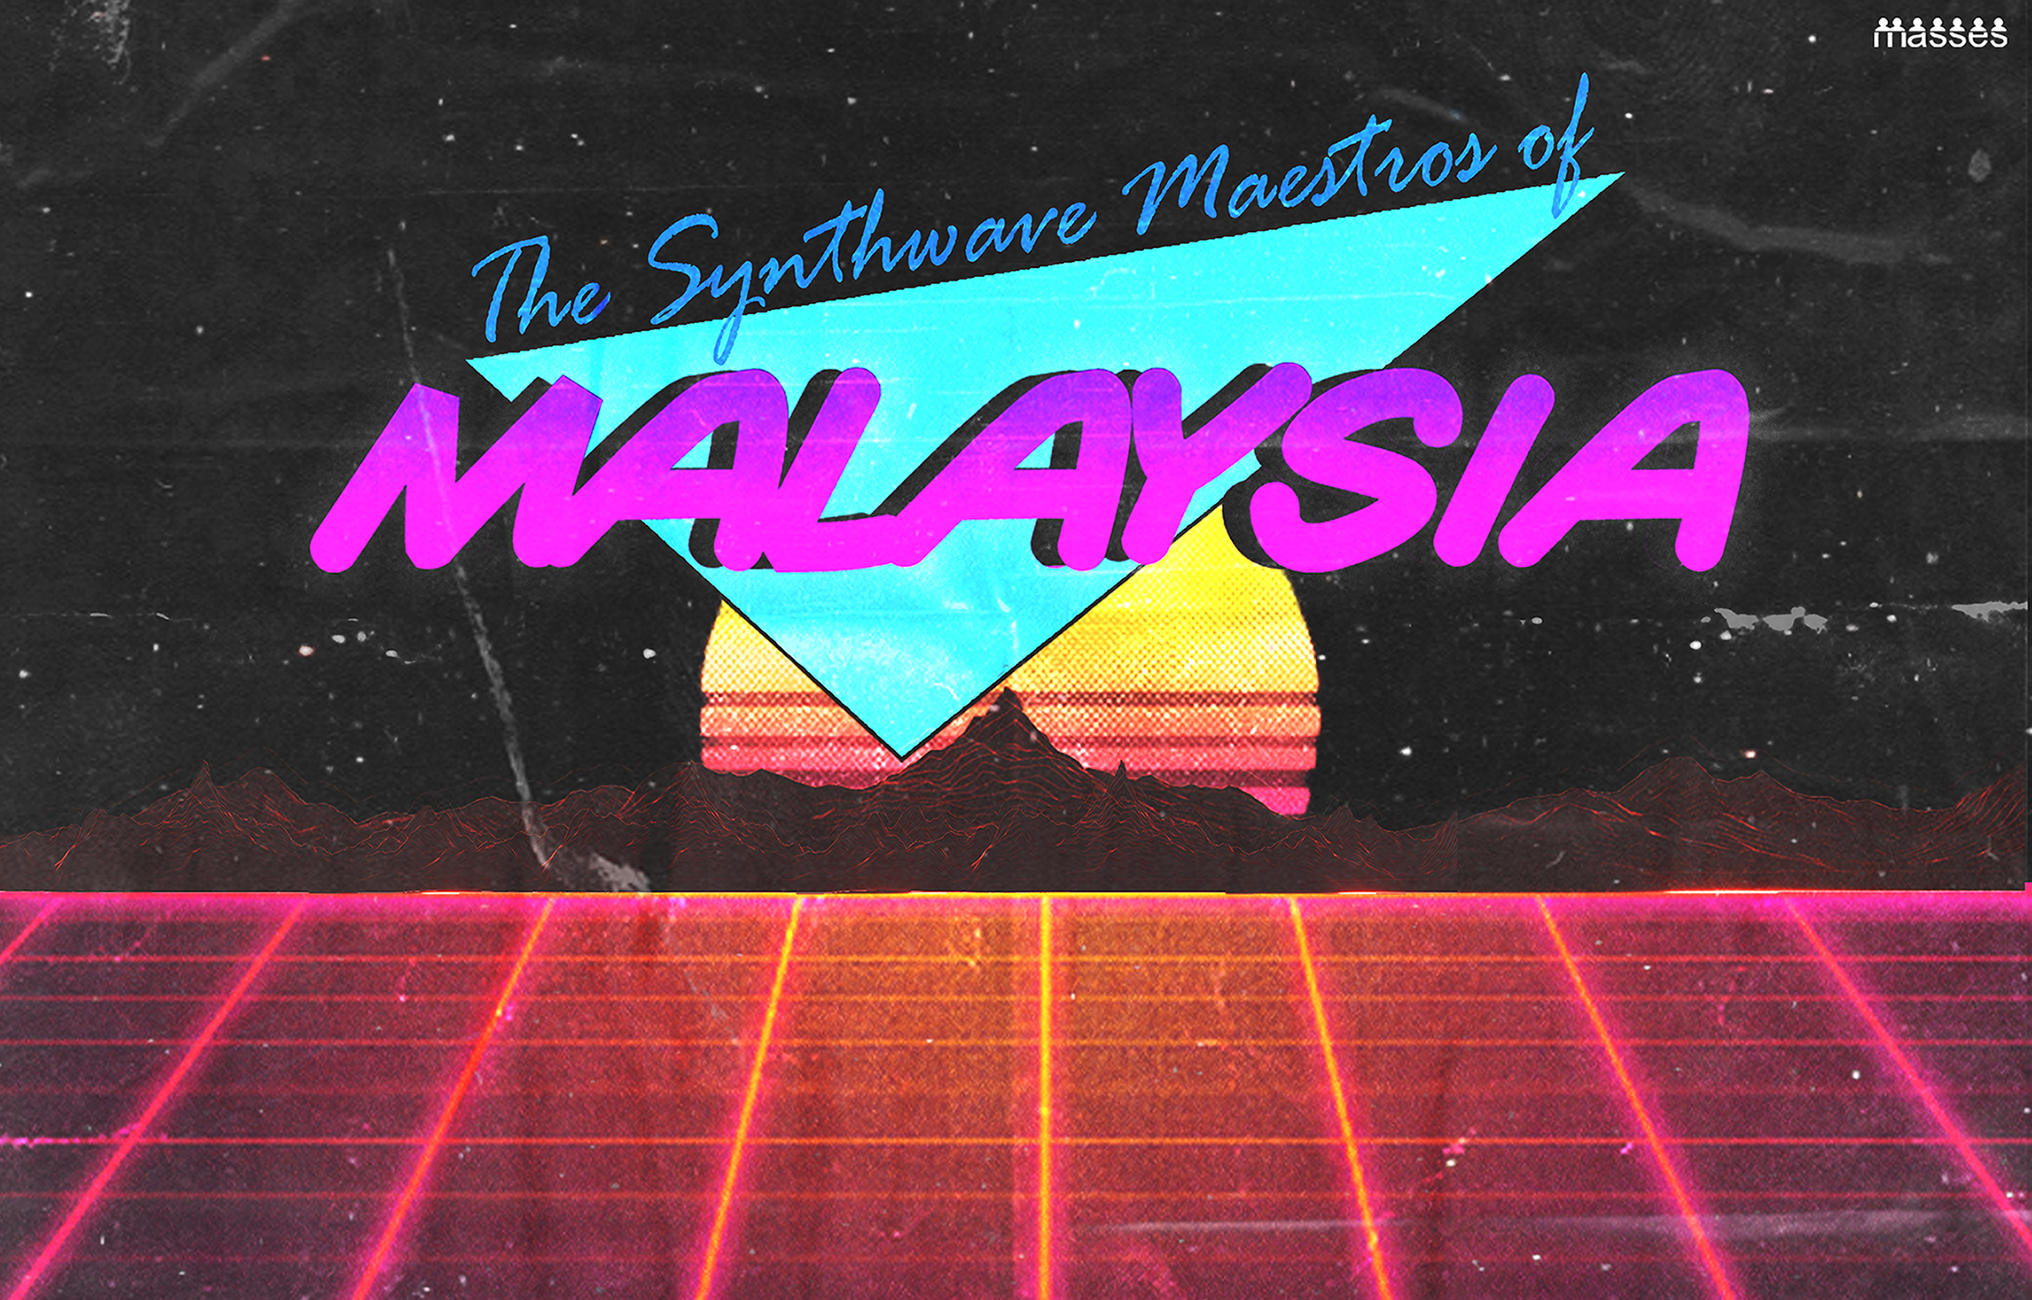 The Synthwave Maestros Of Malaysia MASSES